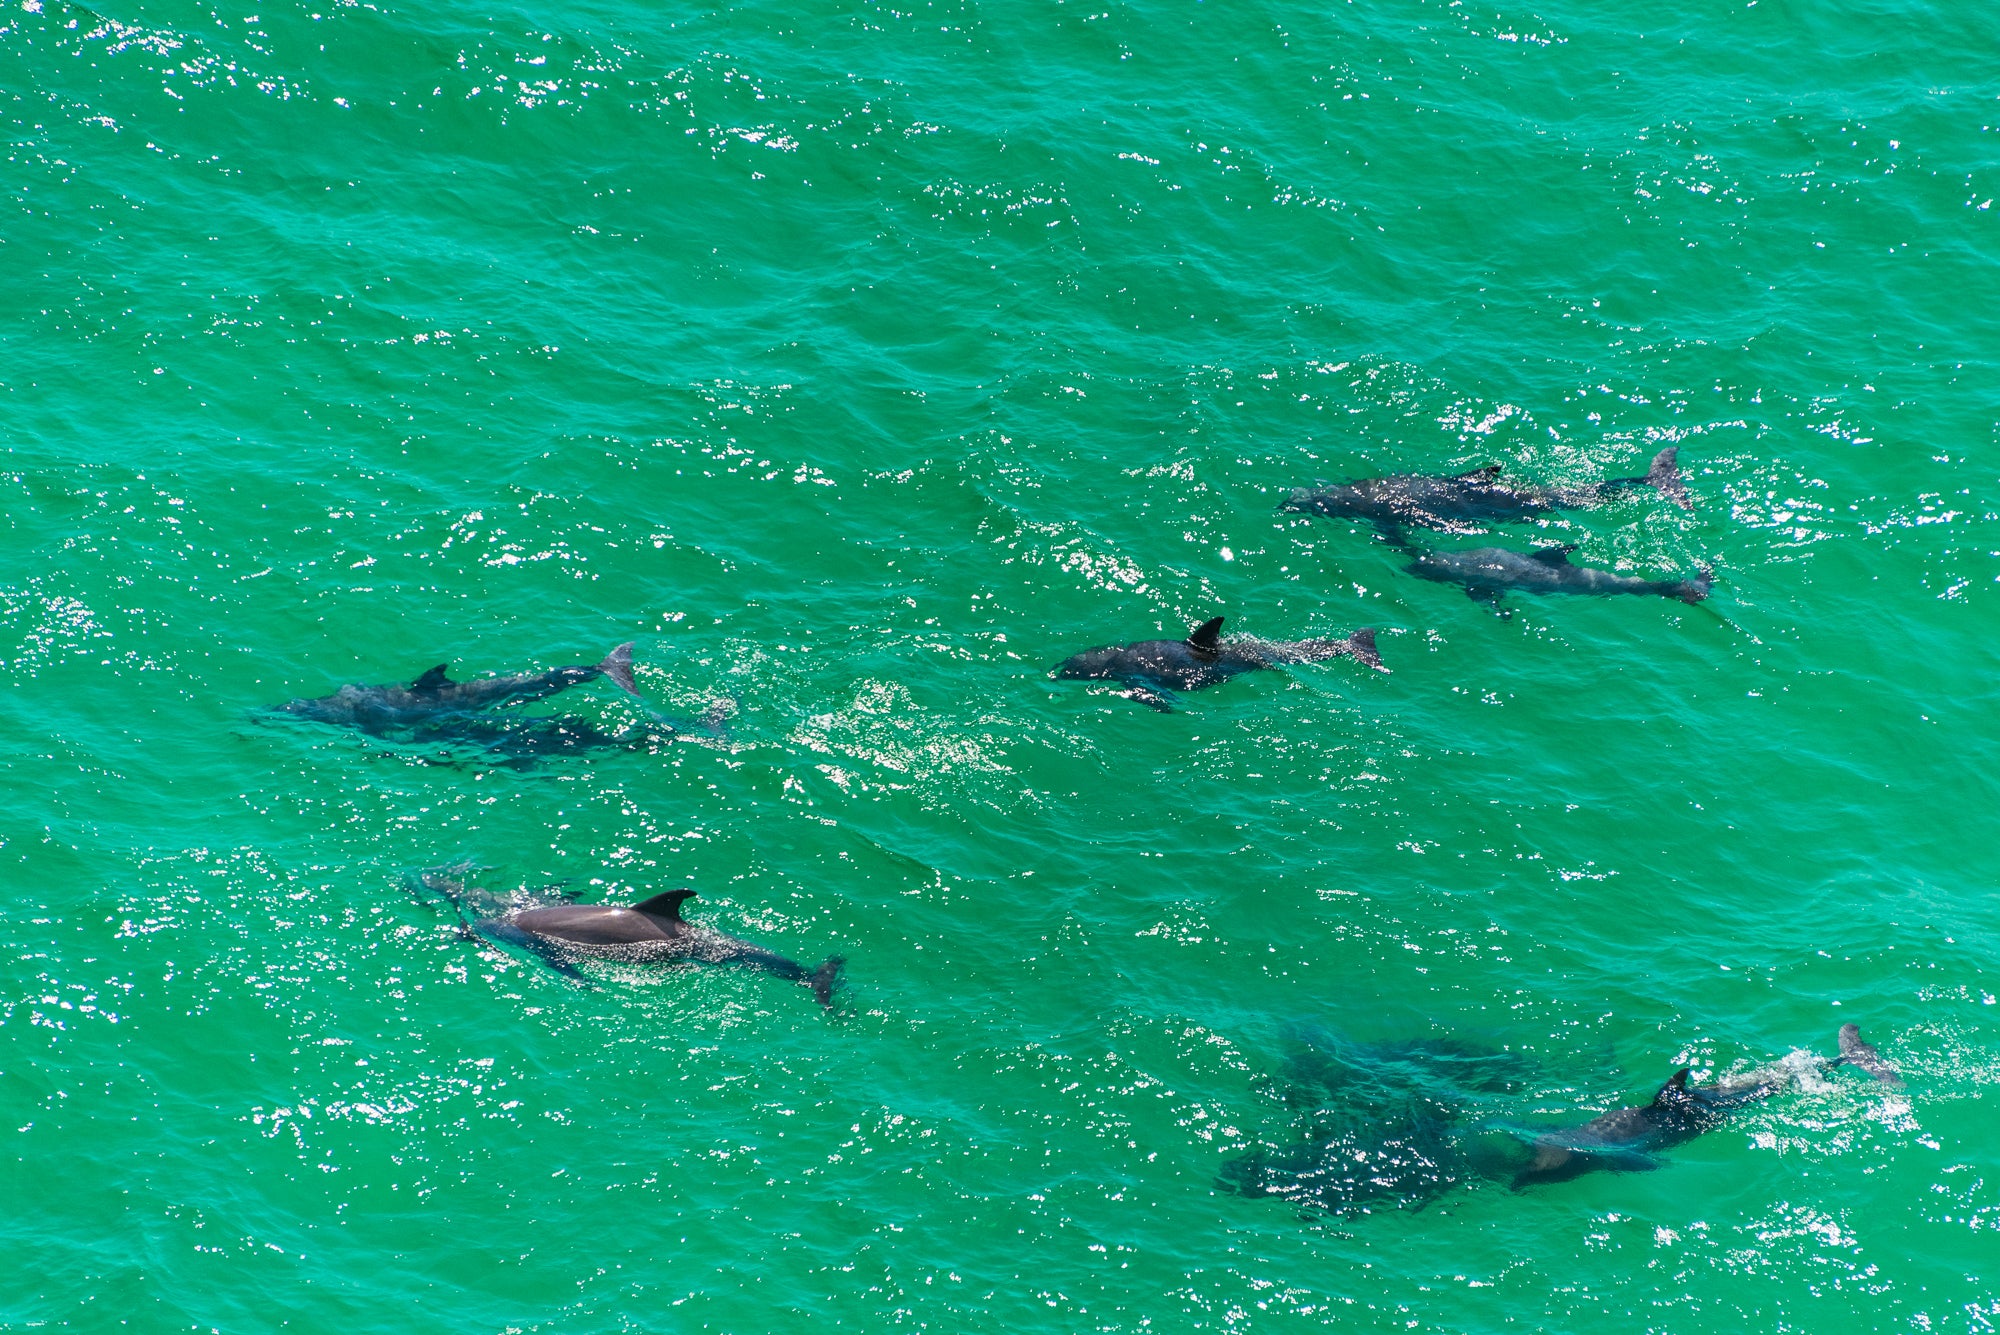 Dolphins at play in the Gulf